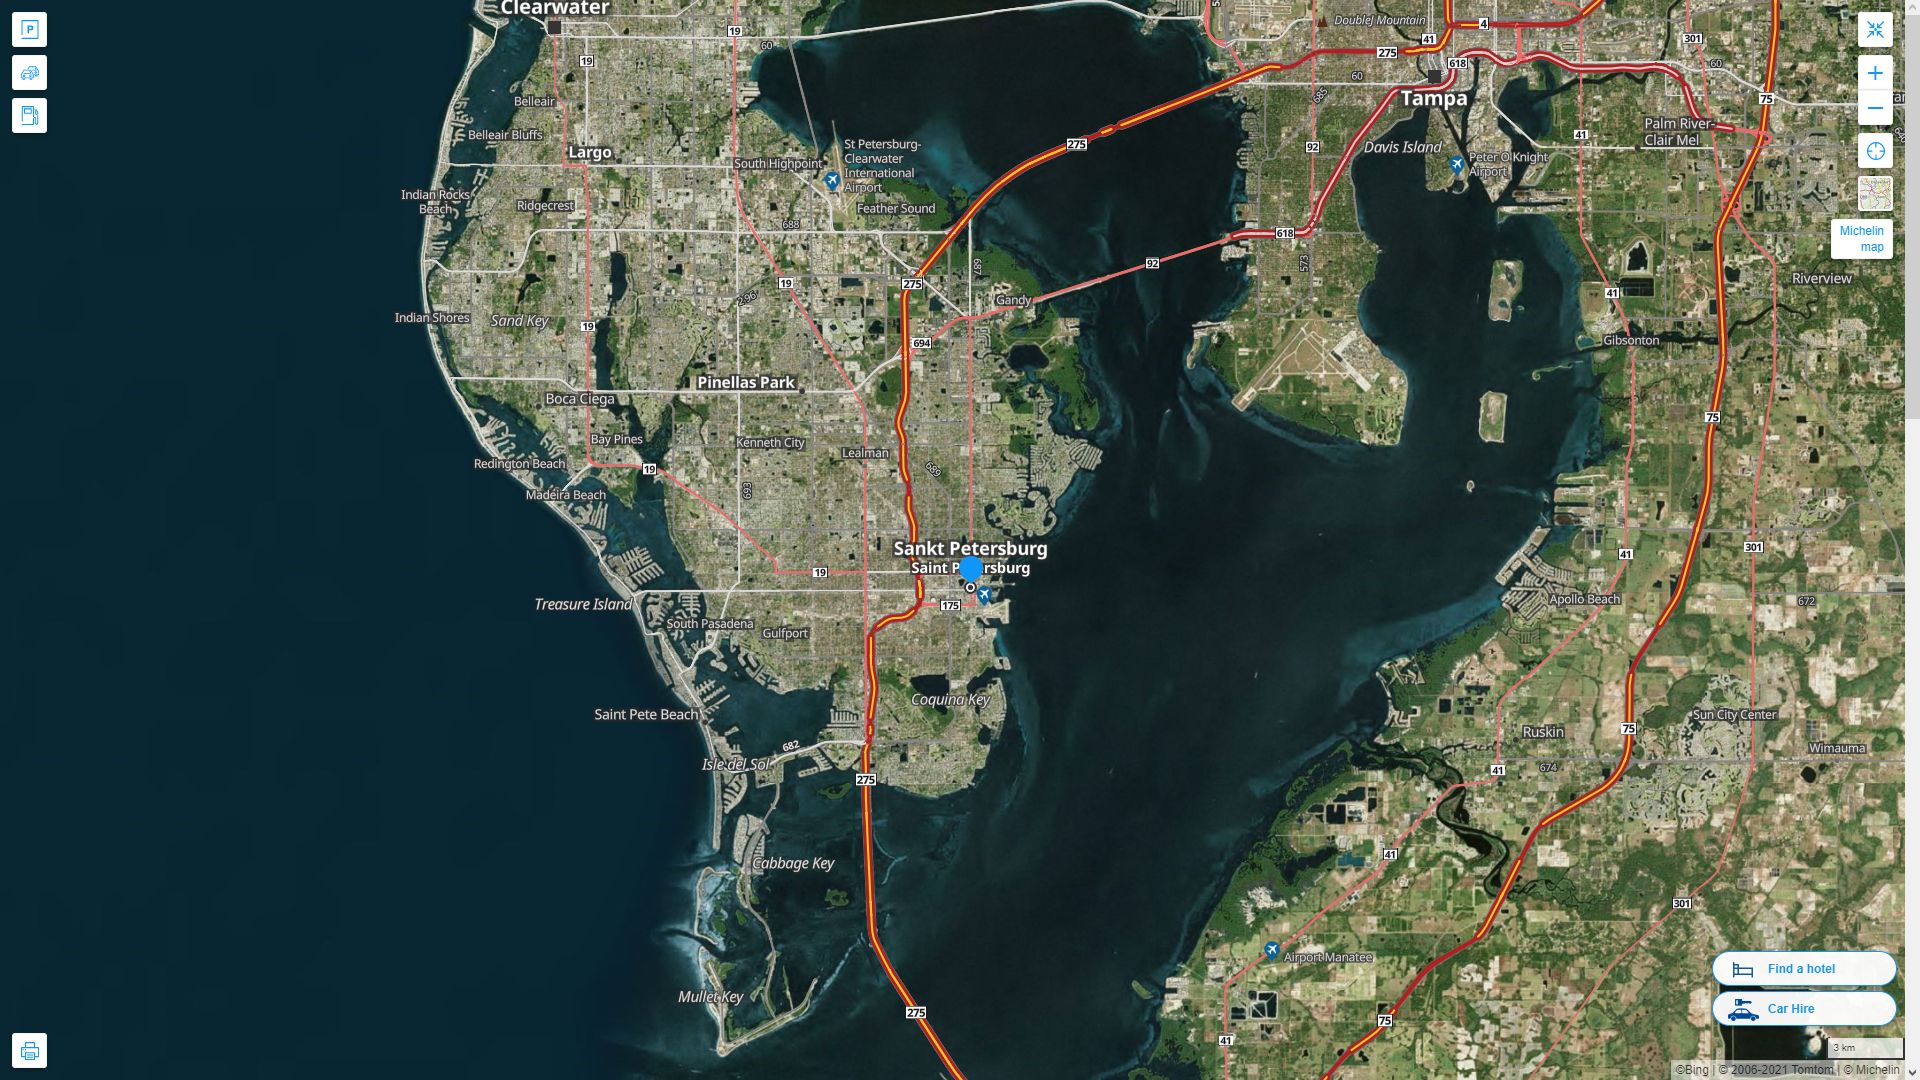 St. Petersburg Florida Highway and Road Map with Satellite View